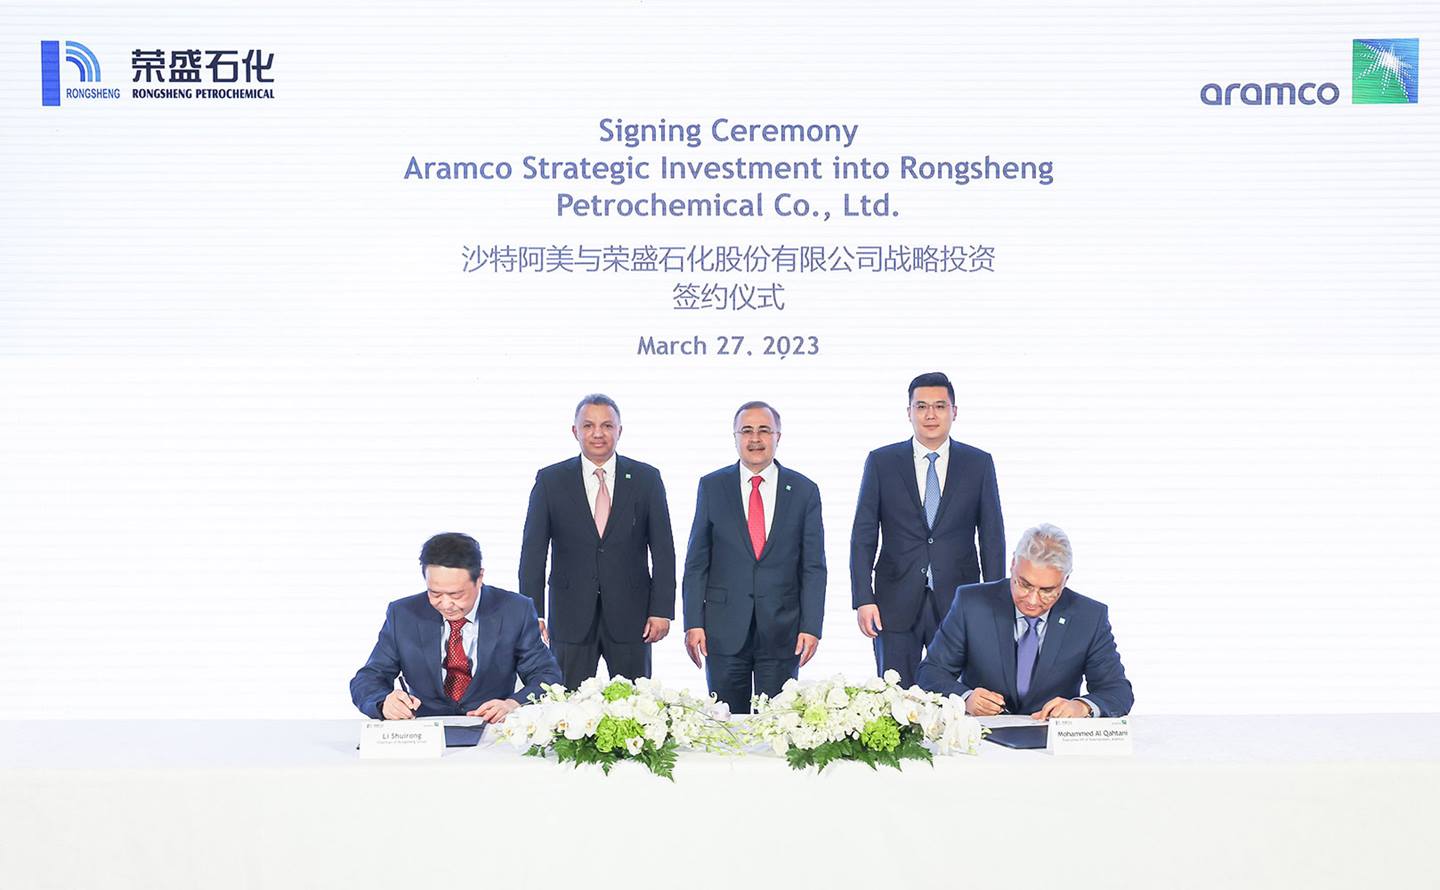 Saudi Aramco announces a huge acquisition deal to boost its presence in China